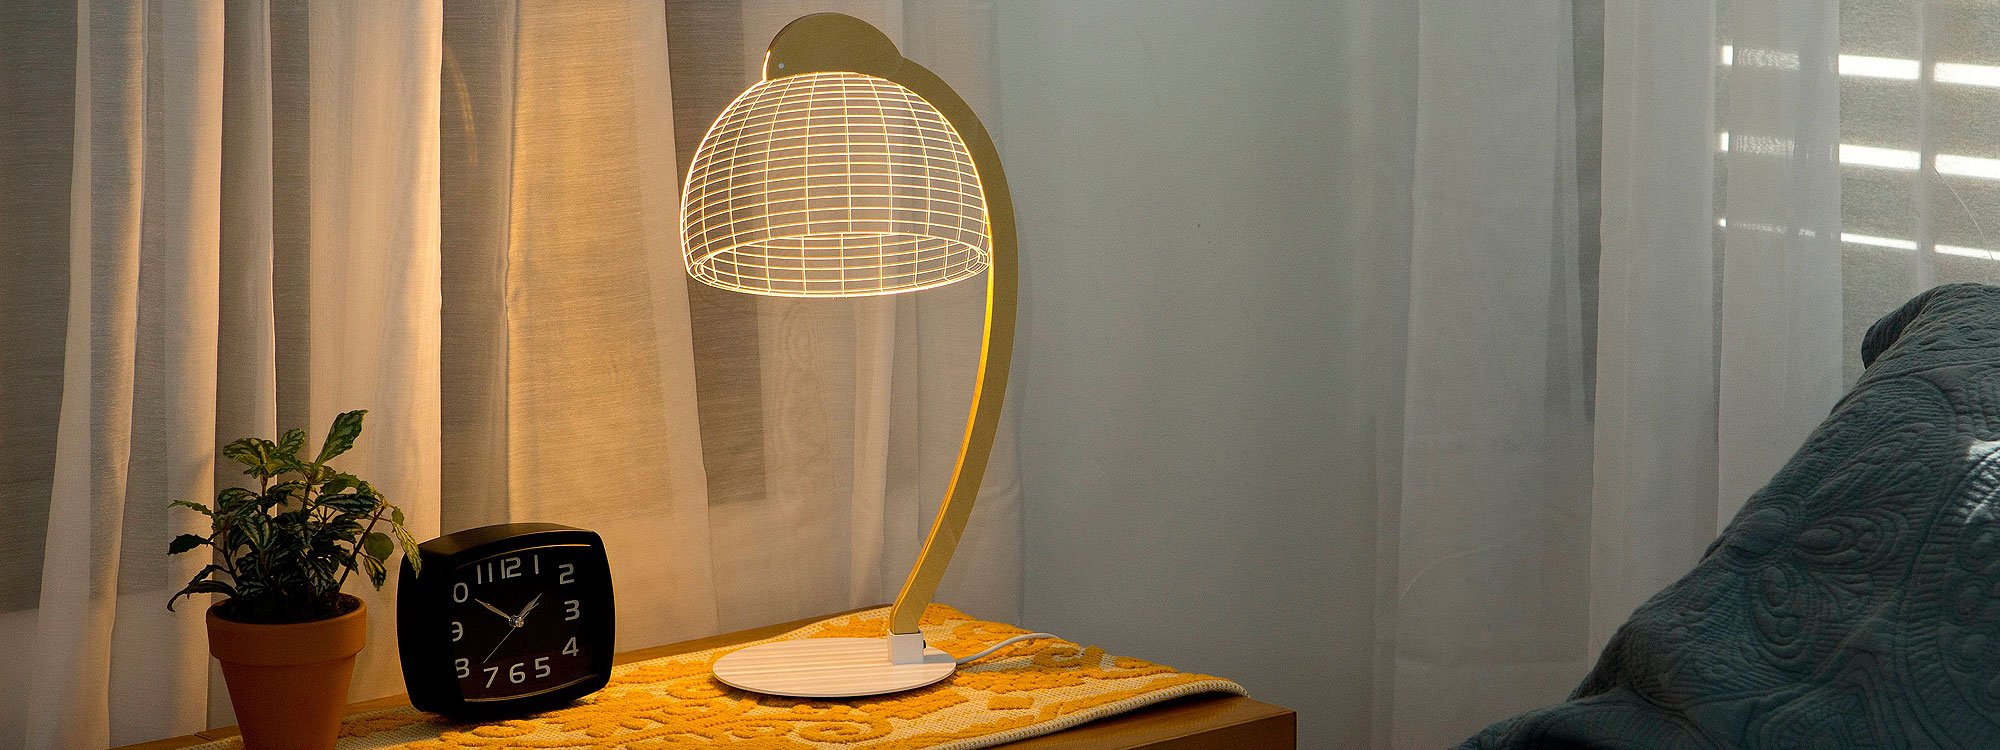 Image of illuminated Dome LED desk light which magically transforms from 2D to 3D by Studio Cheha